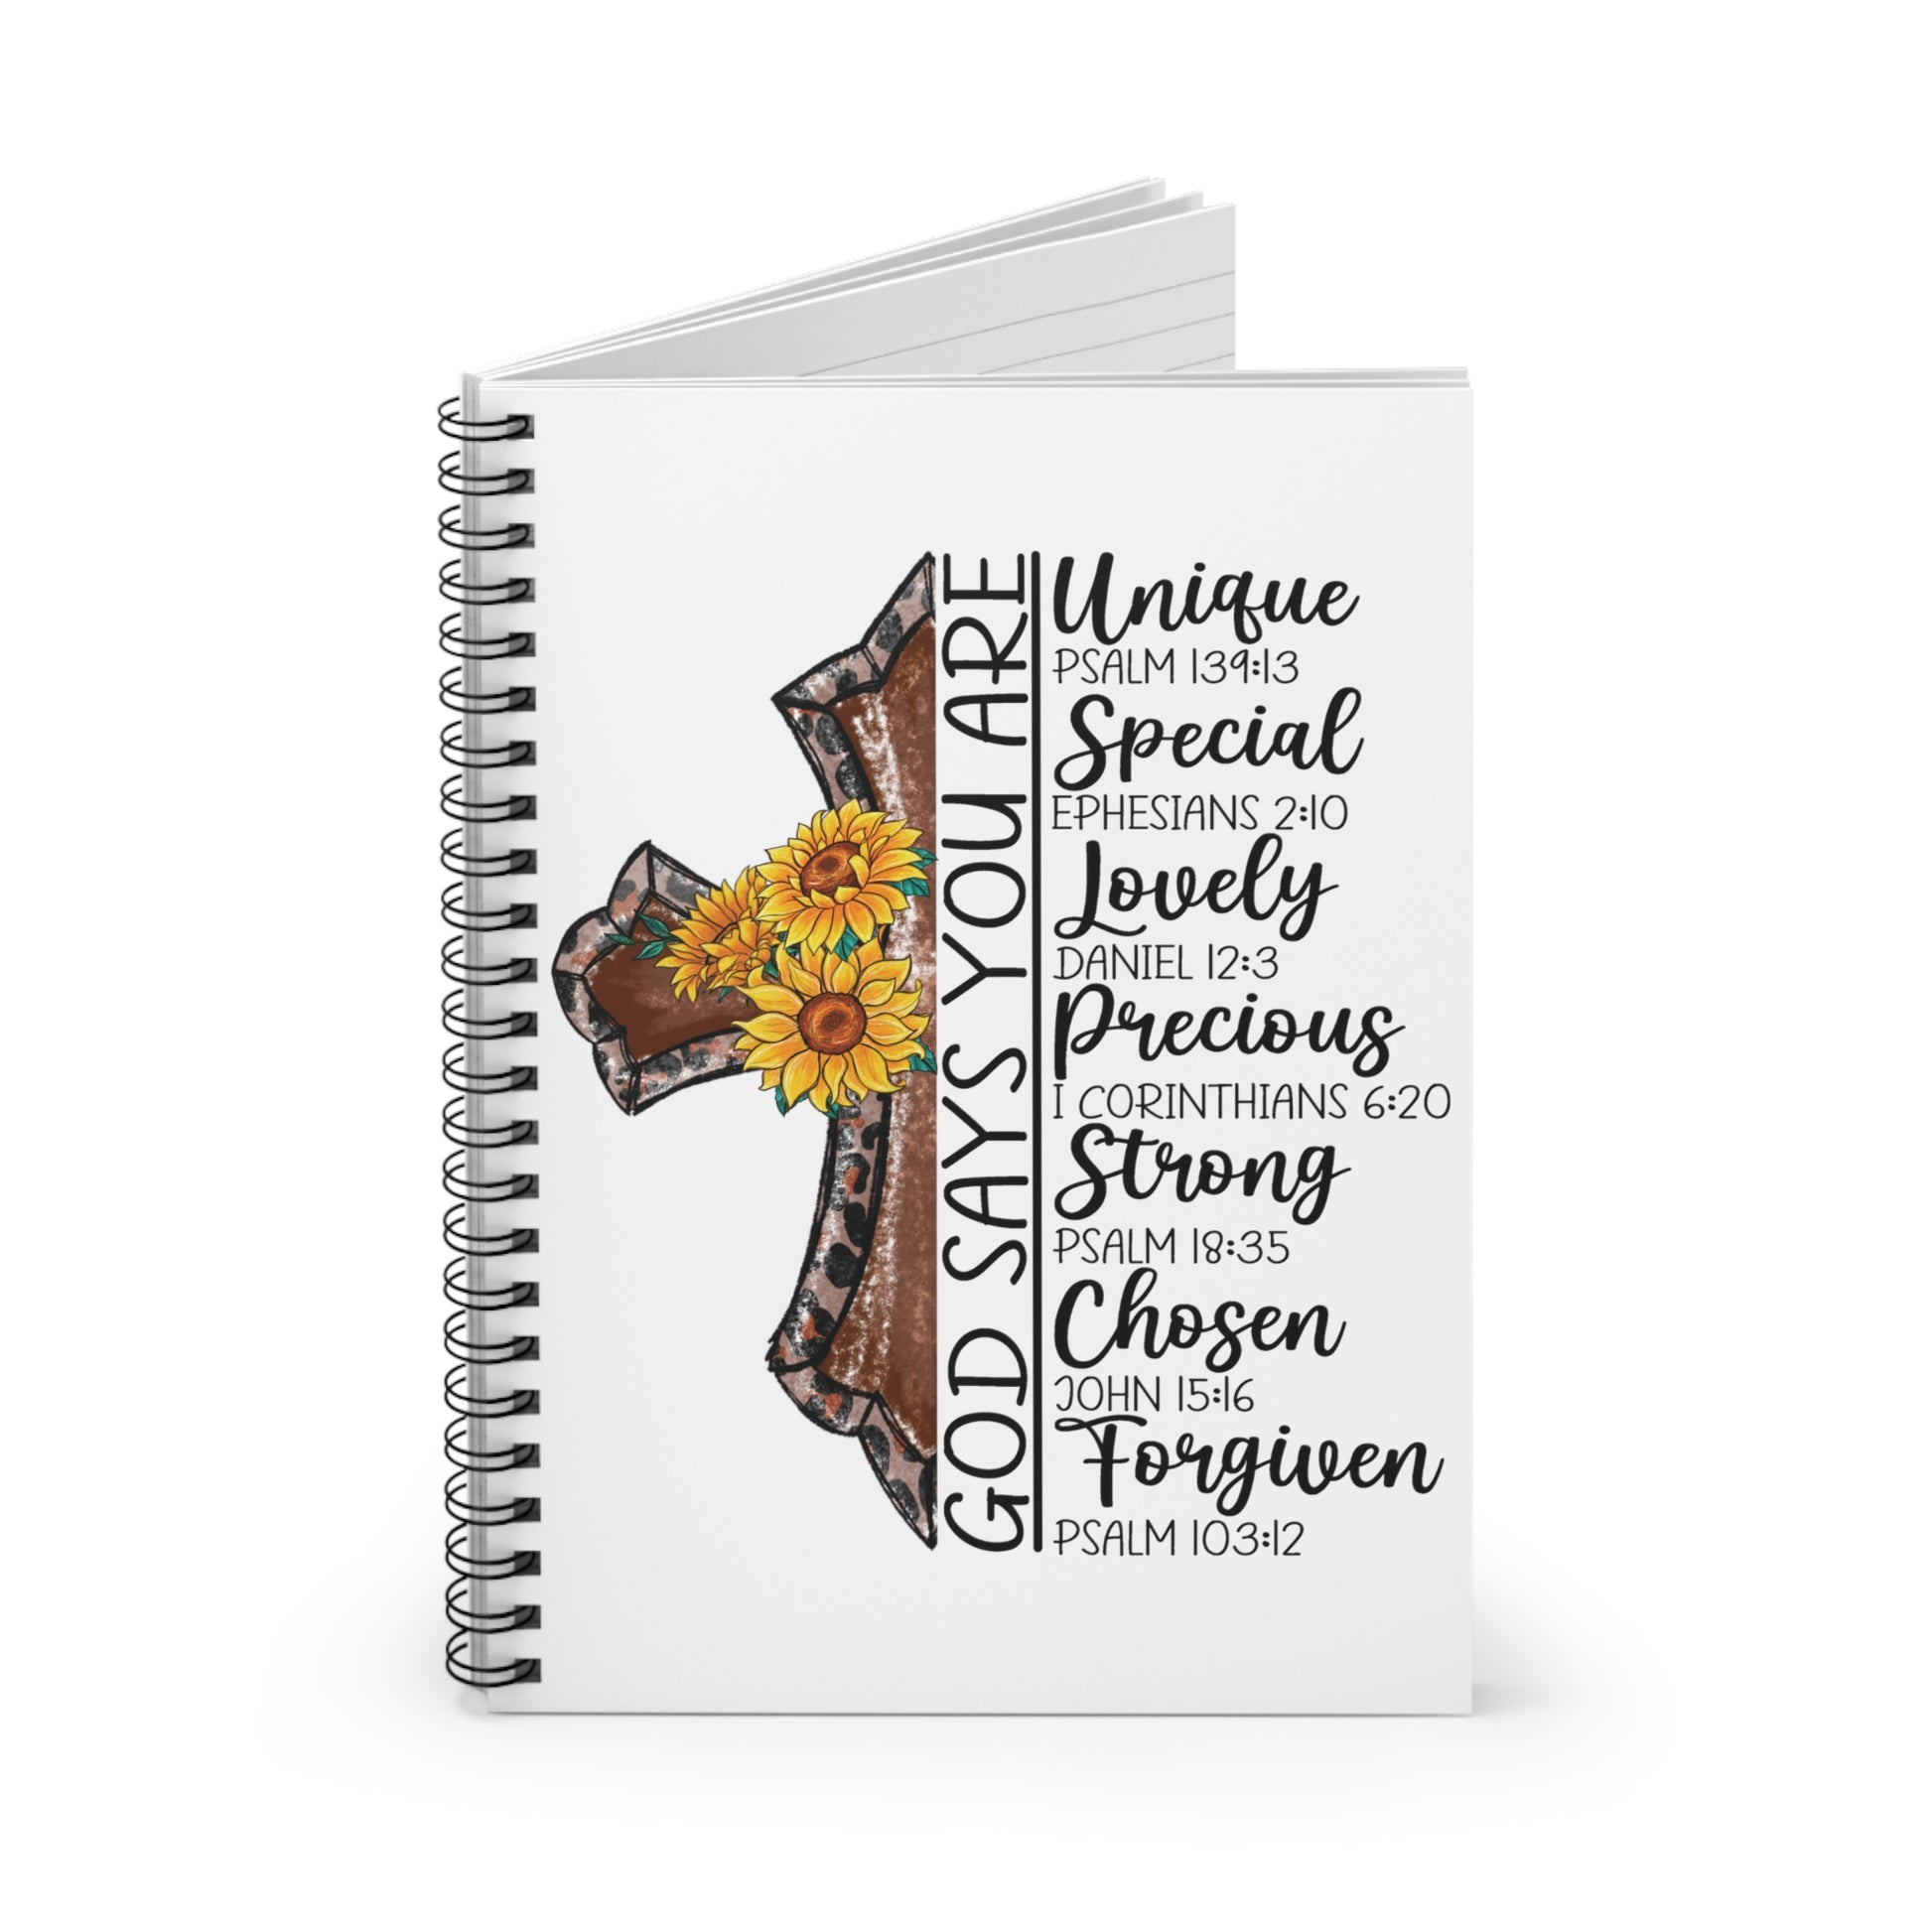 God Says: Spiral Notebook - Log Books - Journals - Diaries - and More Custom Printed by TheGlassyLass